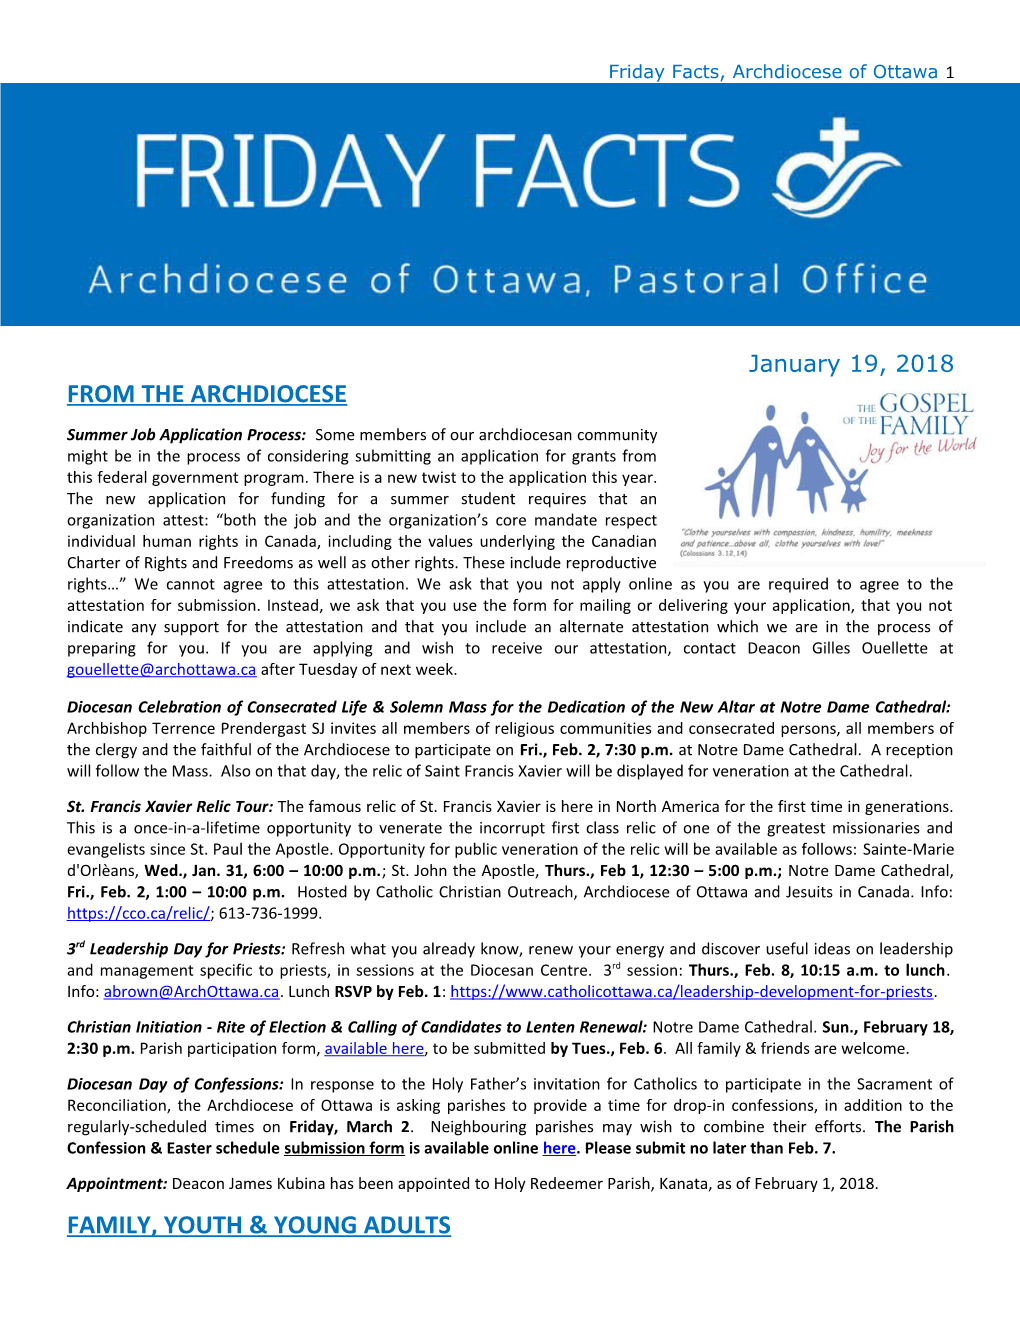 Friday Facts, Archdiocese of Ottawa1